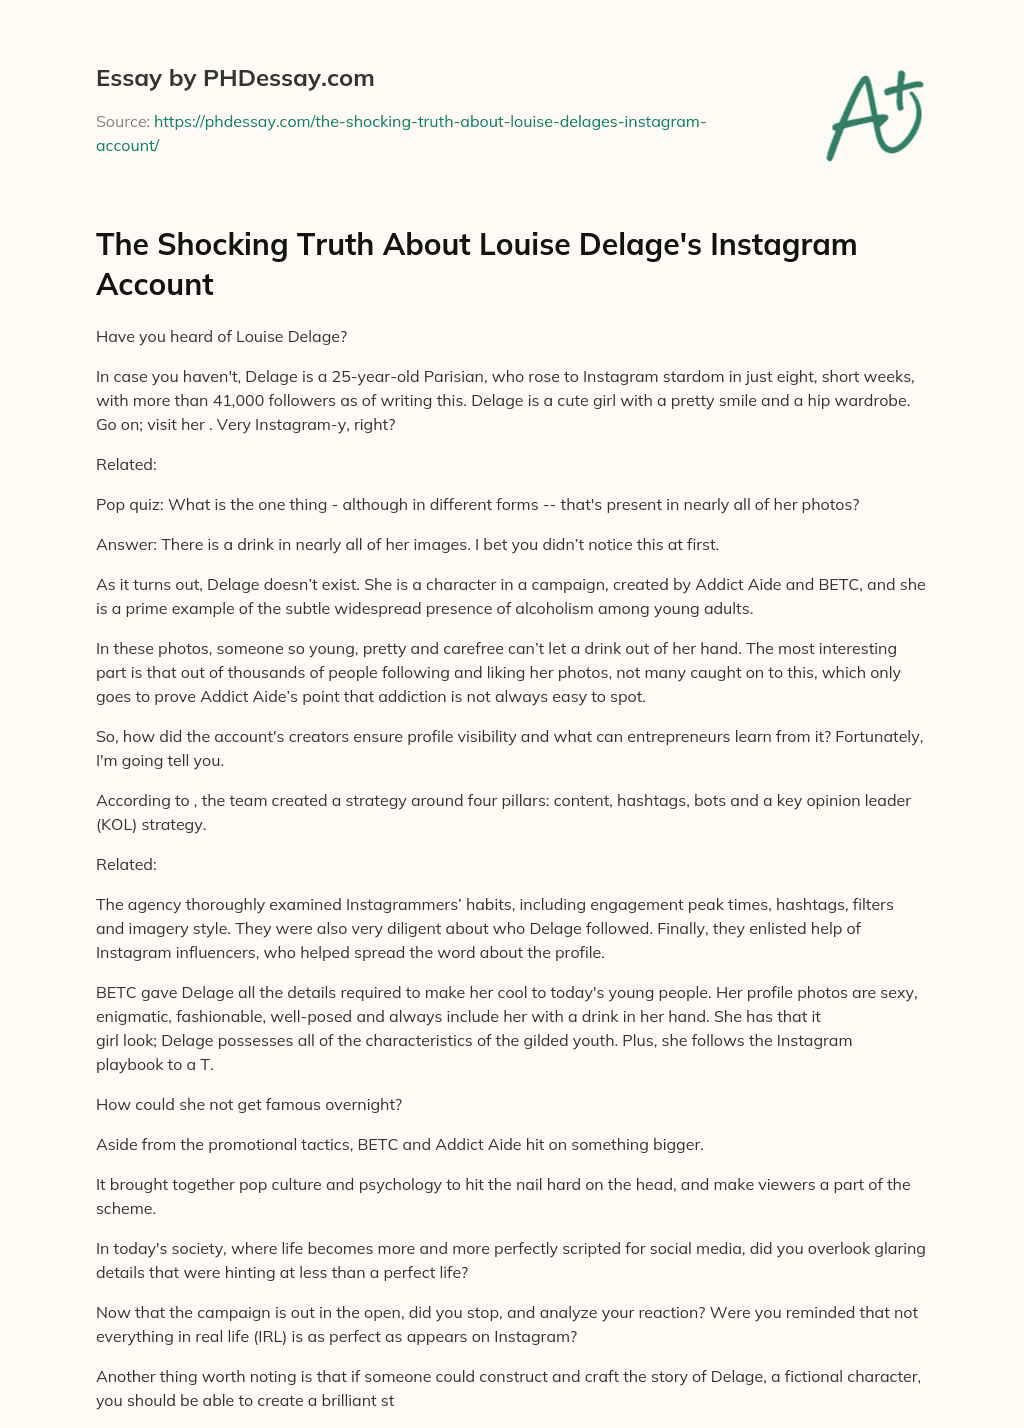 The Shocking Truth About Louise Delage’s Instagram Account essay